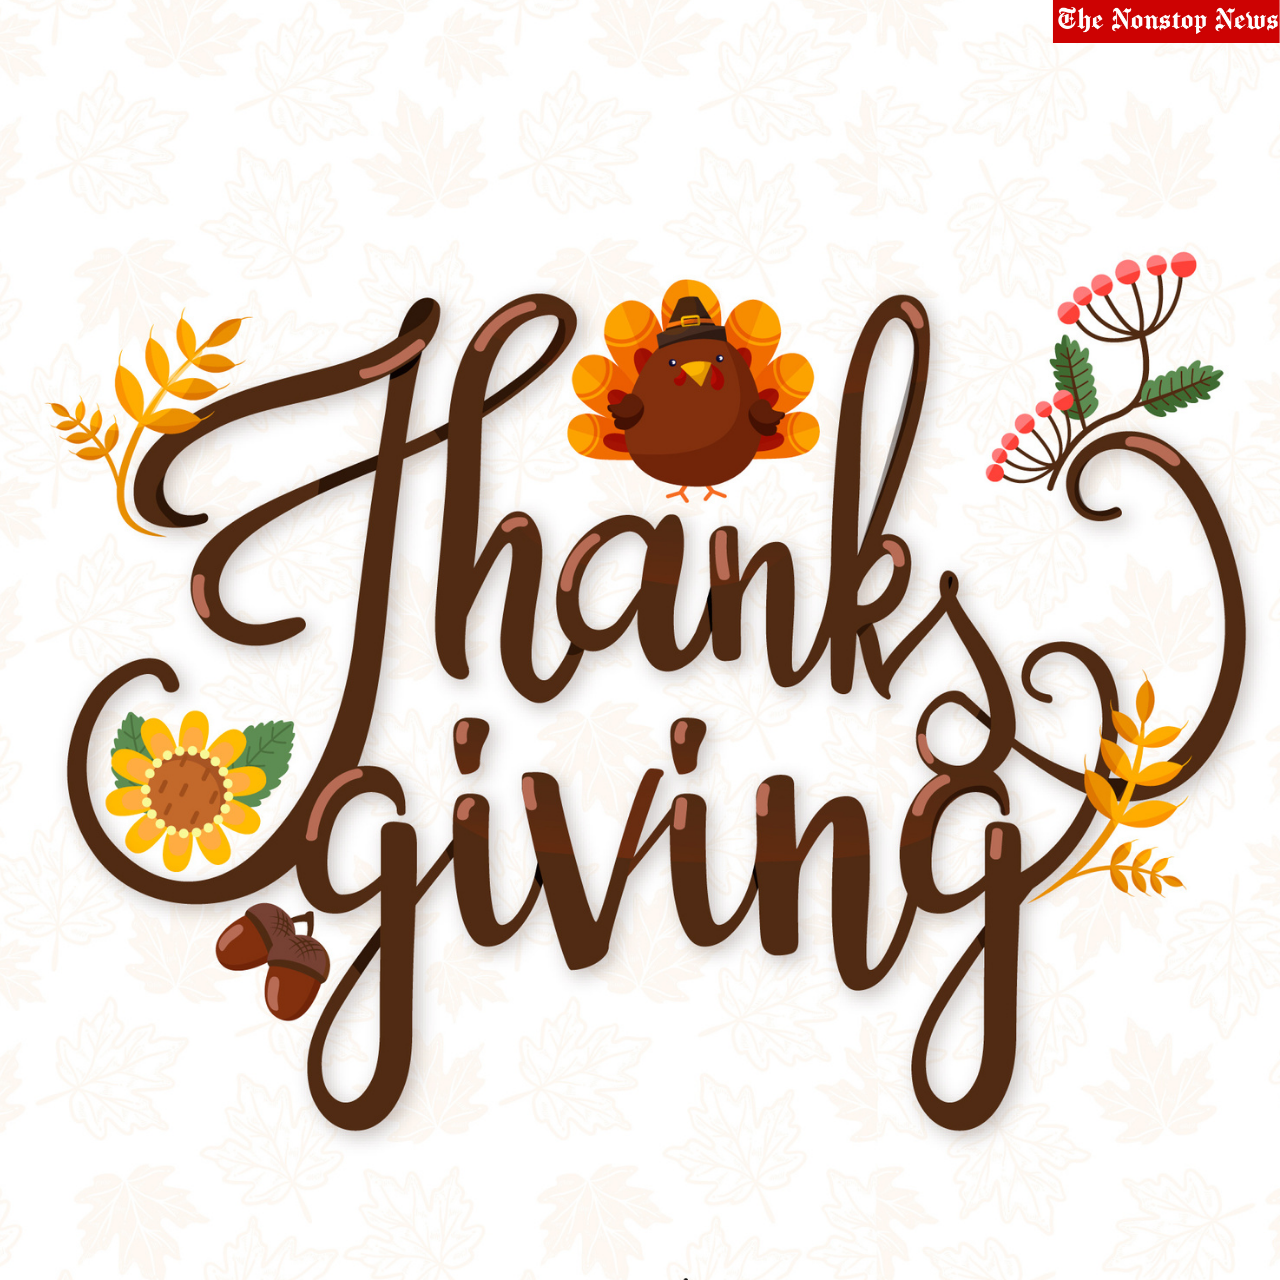 Thanksgiving 2021 Wishes, Quotes, Sayings, Greetings, Messages, and HD Images to greet your Boss or Manager